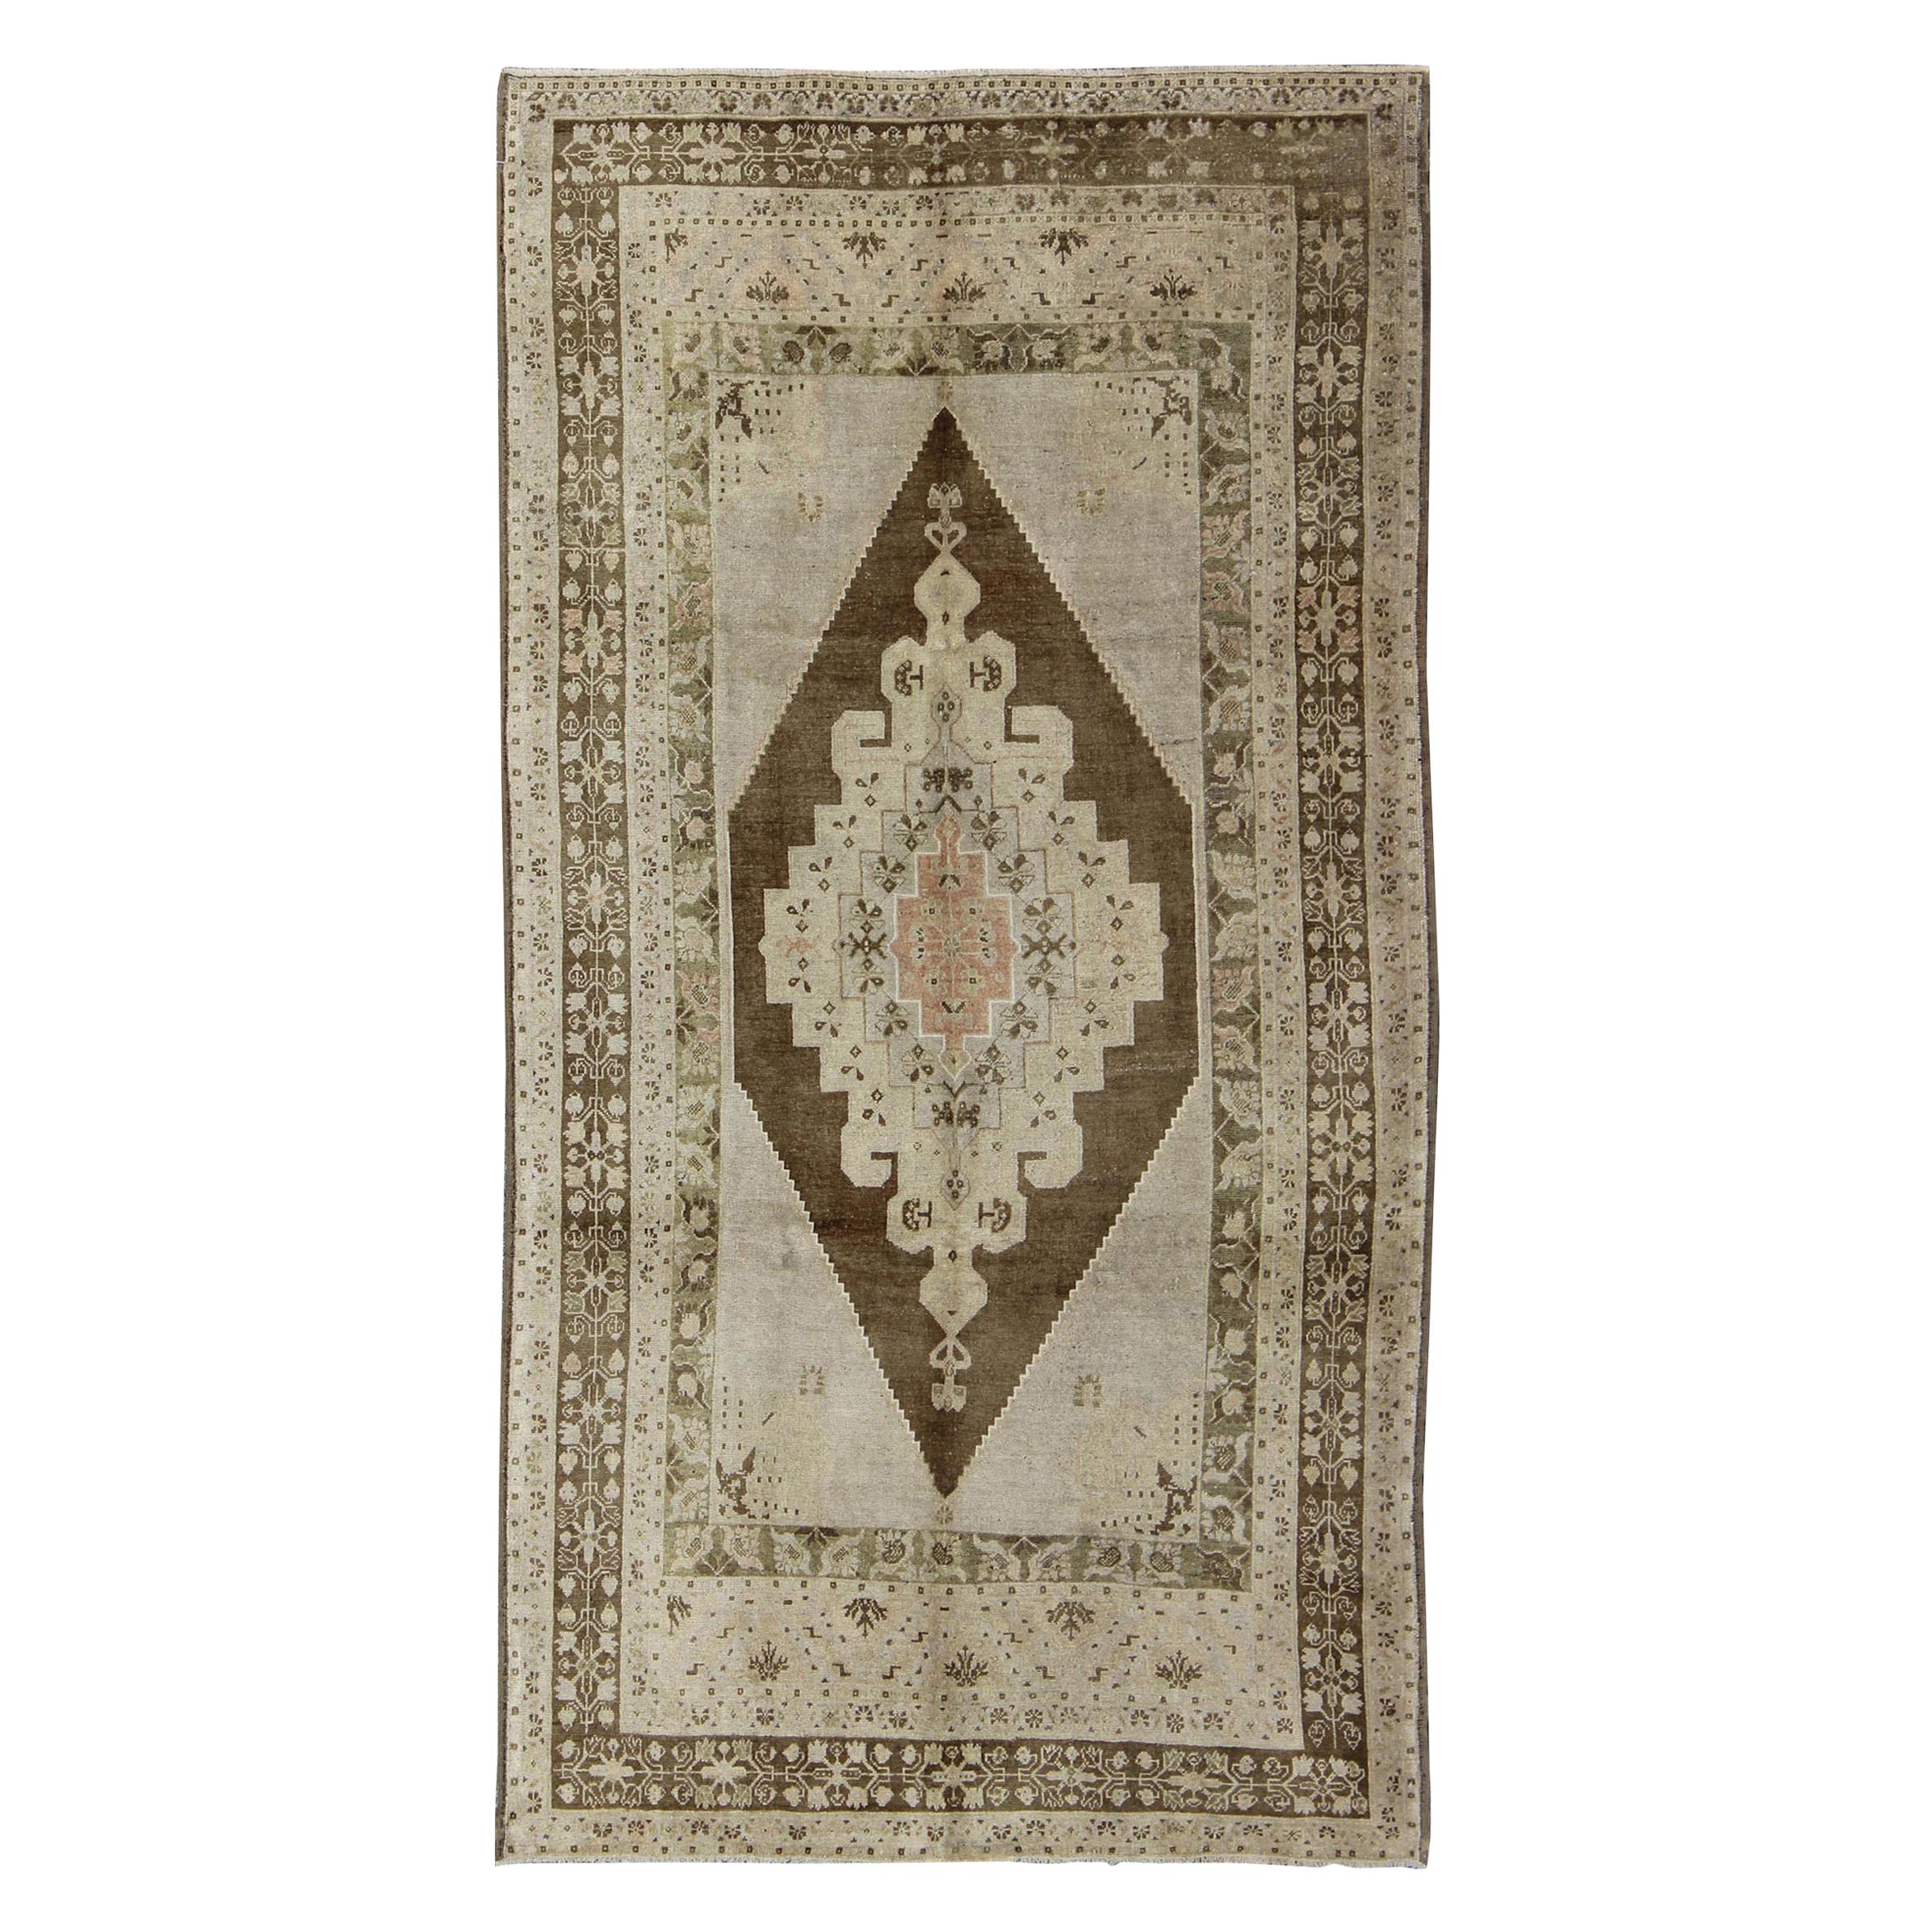 Vintage Turkish Oushak Rug with Floral Multi-Layered Medallion in Brown & Cream